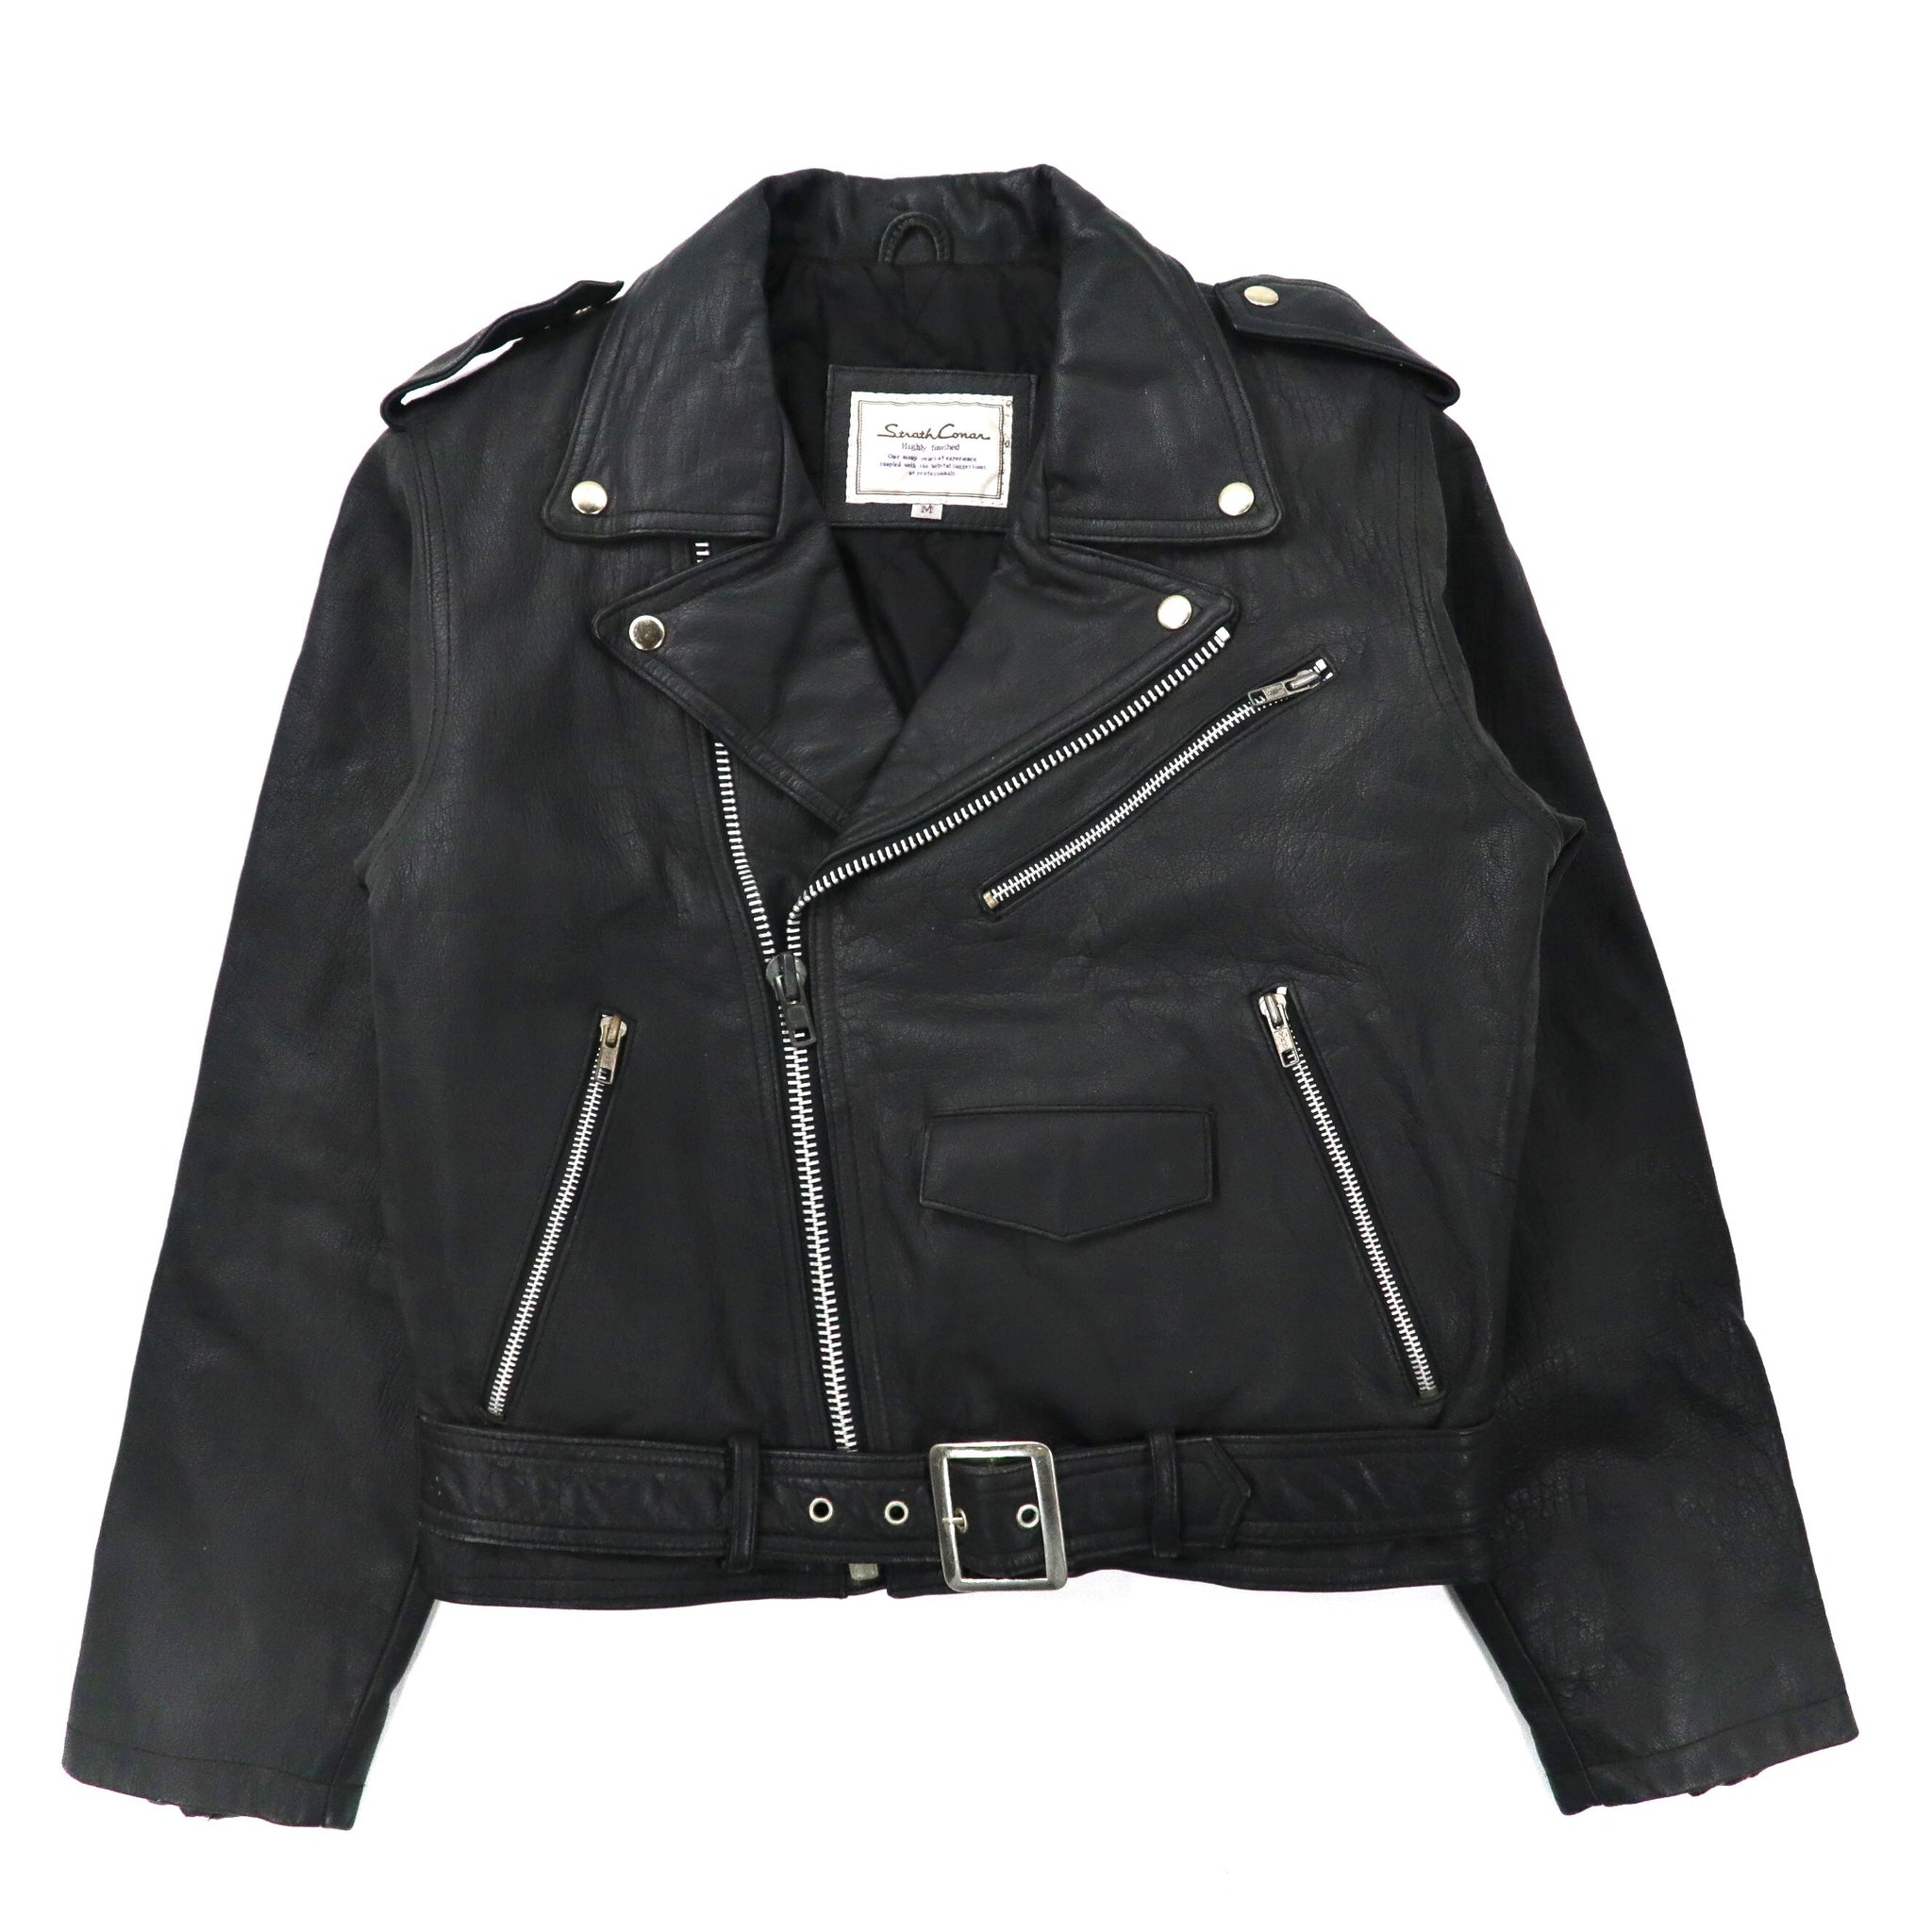 COWHIDE LEATHER W RIDERS JACKET Double Riders Jacket M Black Cow ...